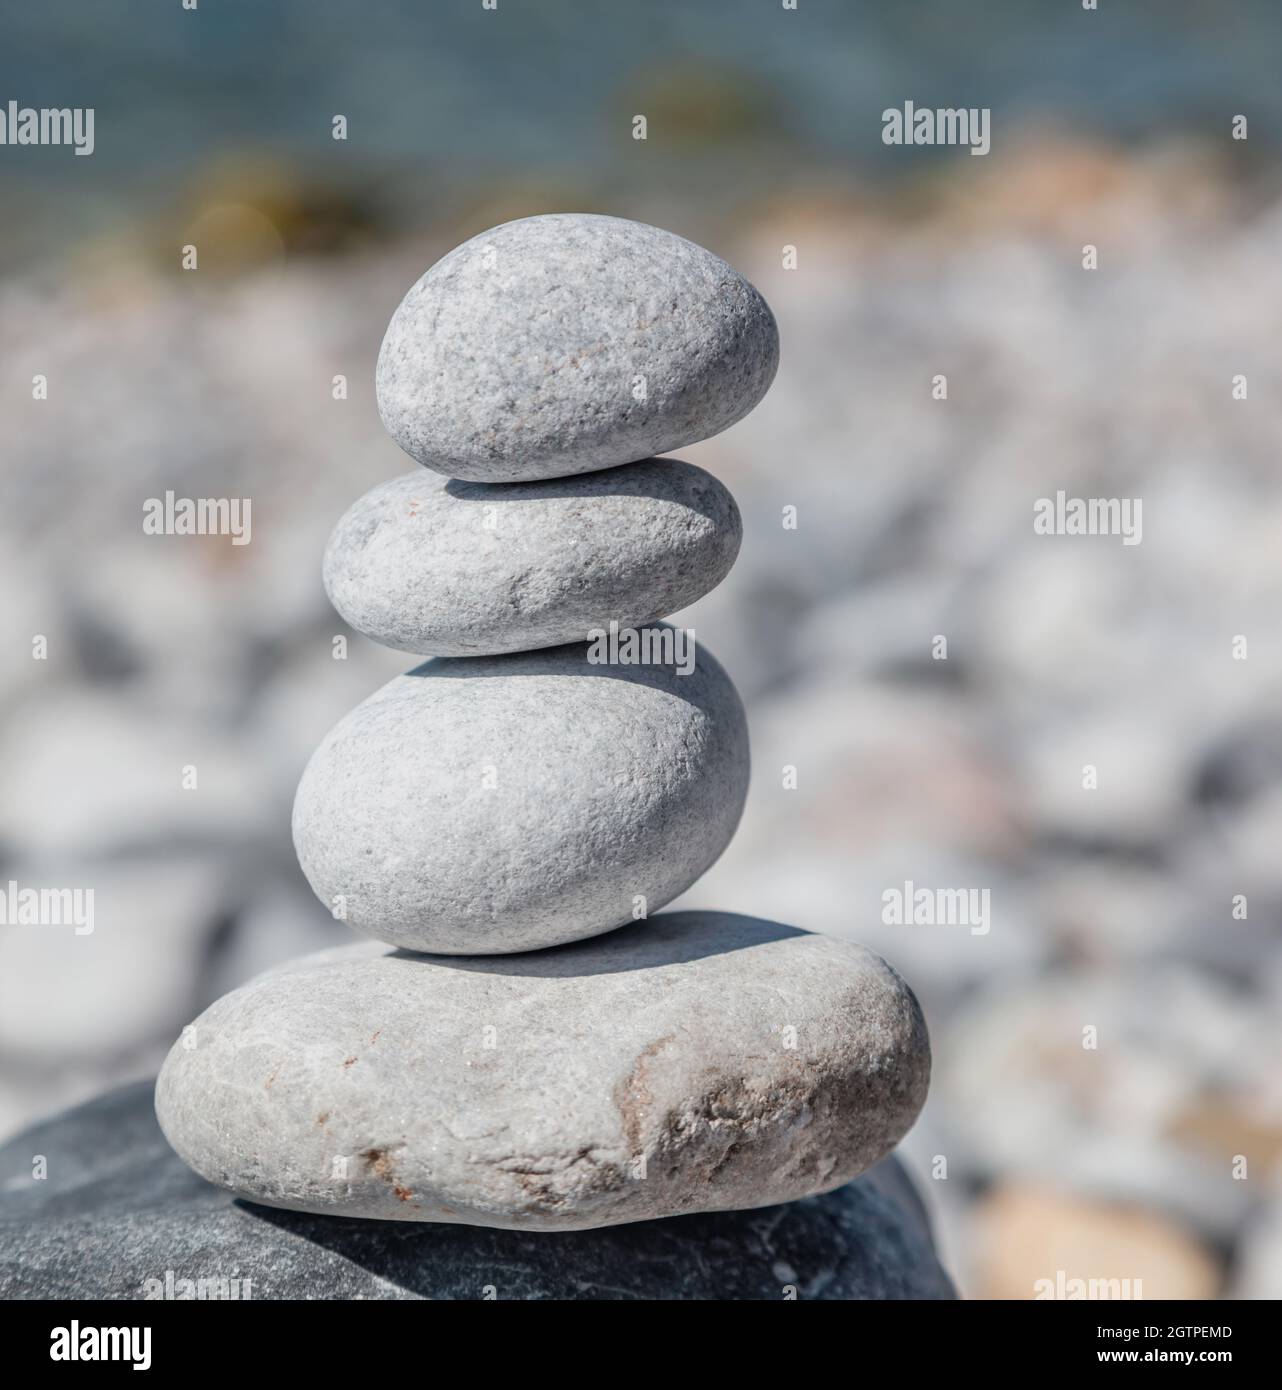 Feng shui, harmony and peace concept. Balance, zen stones, smooth rock tower stacked on pebble beach, blue sea background, sunny day. Stock Photo